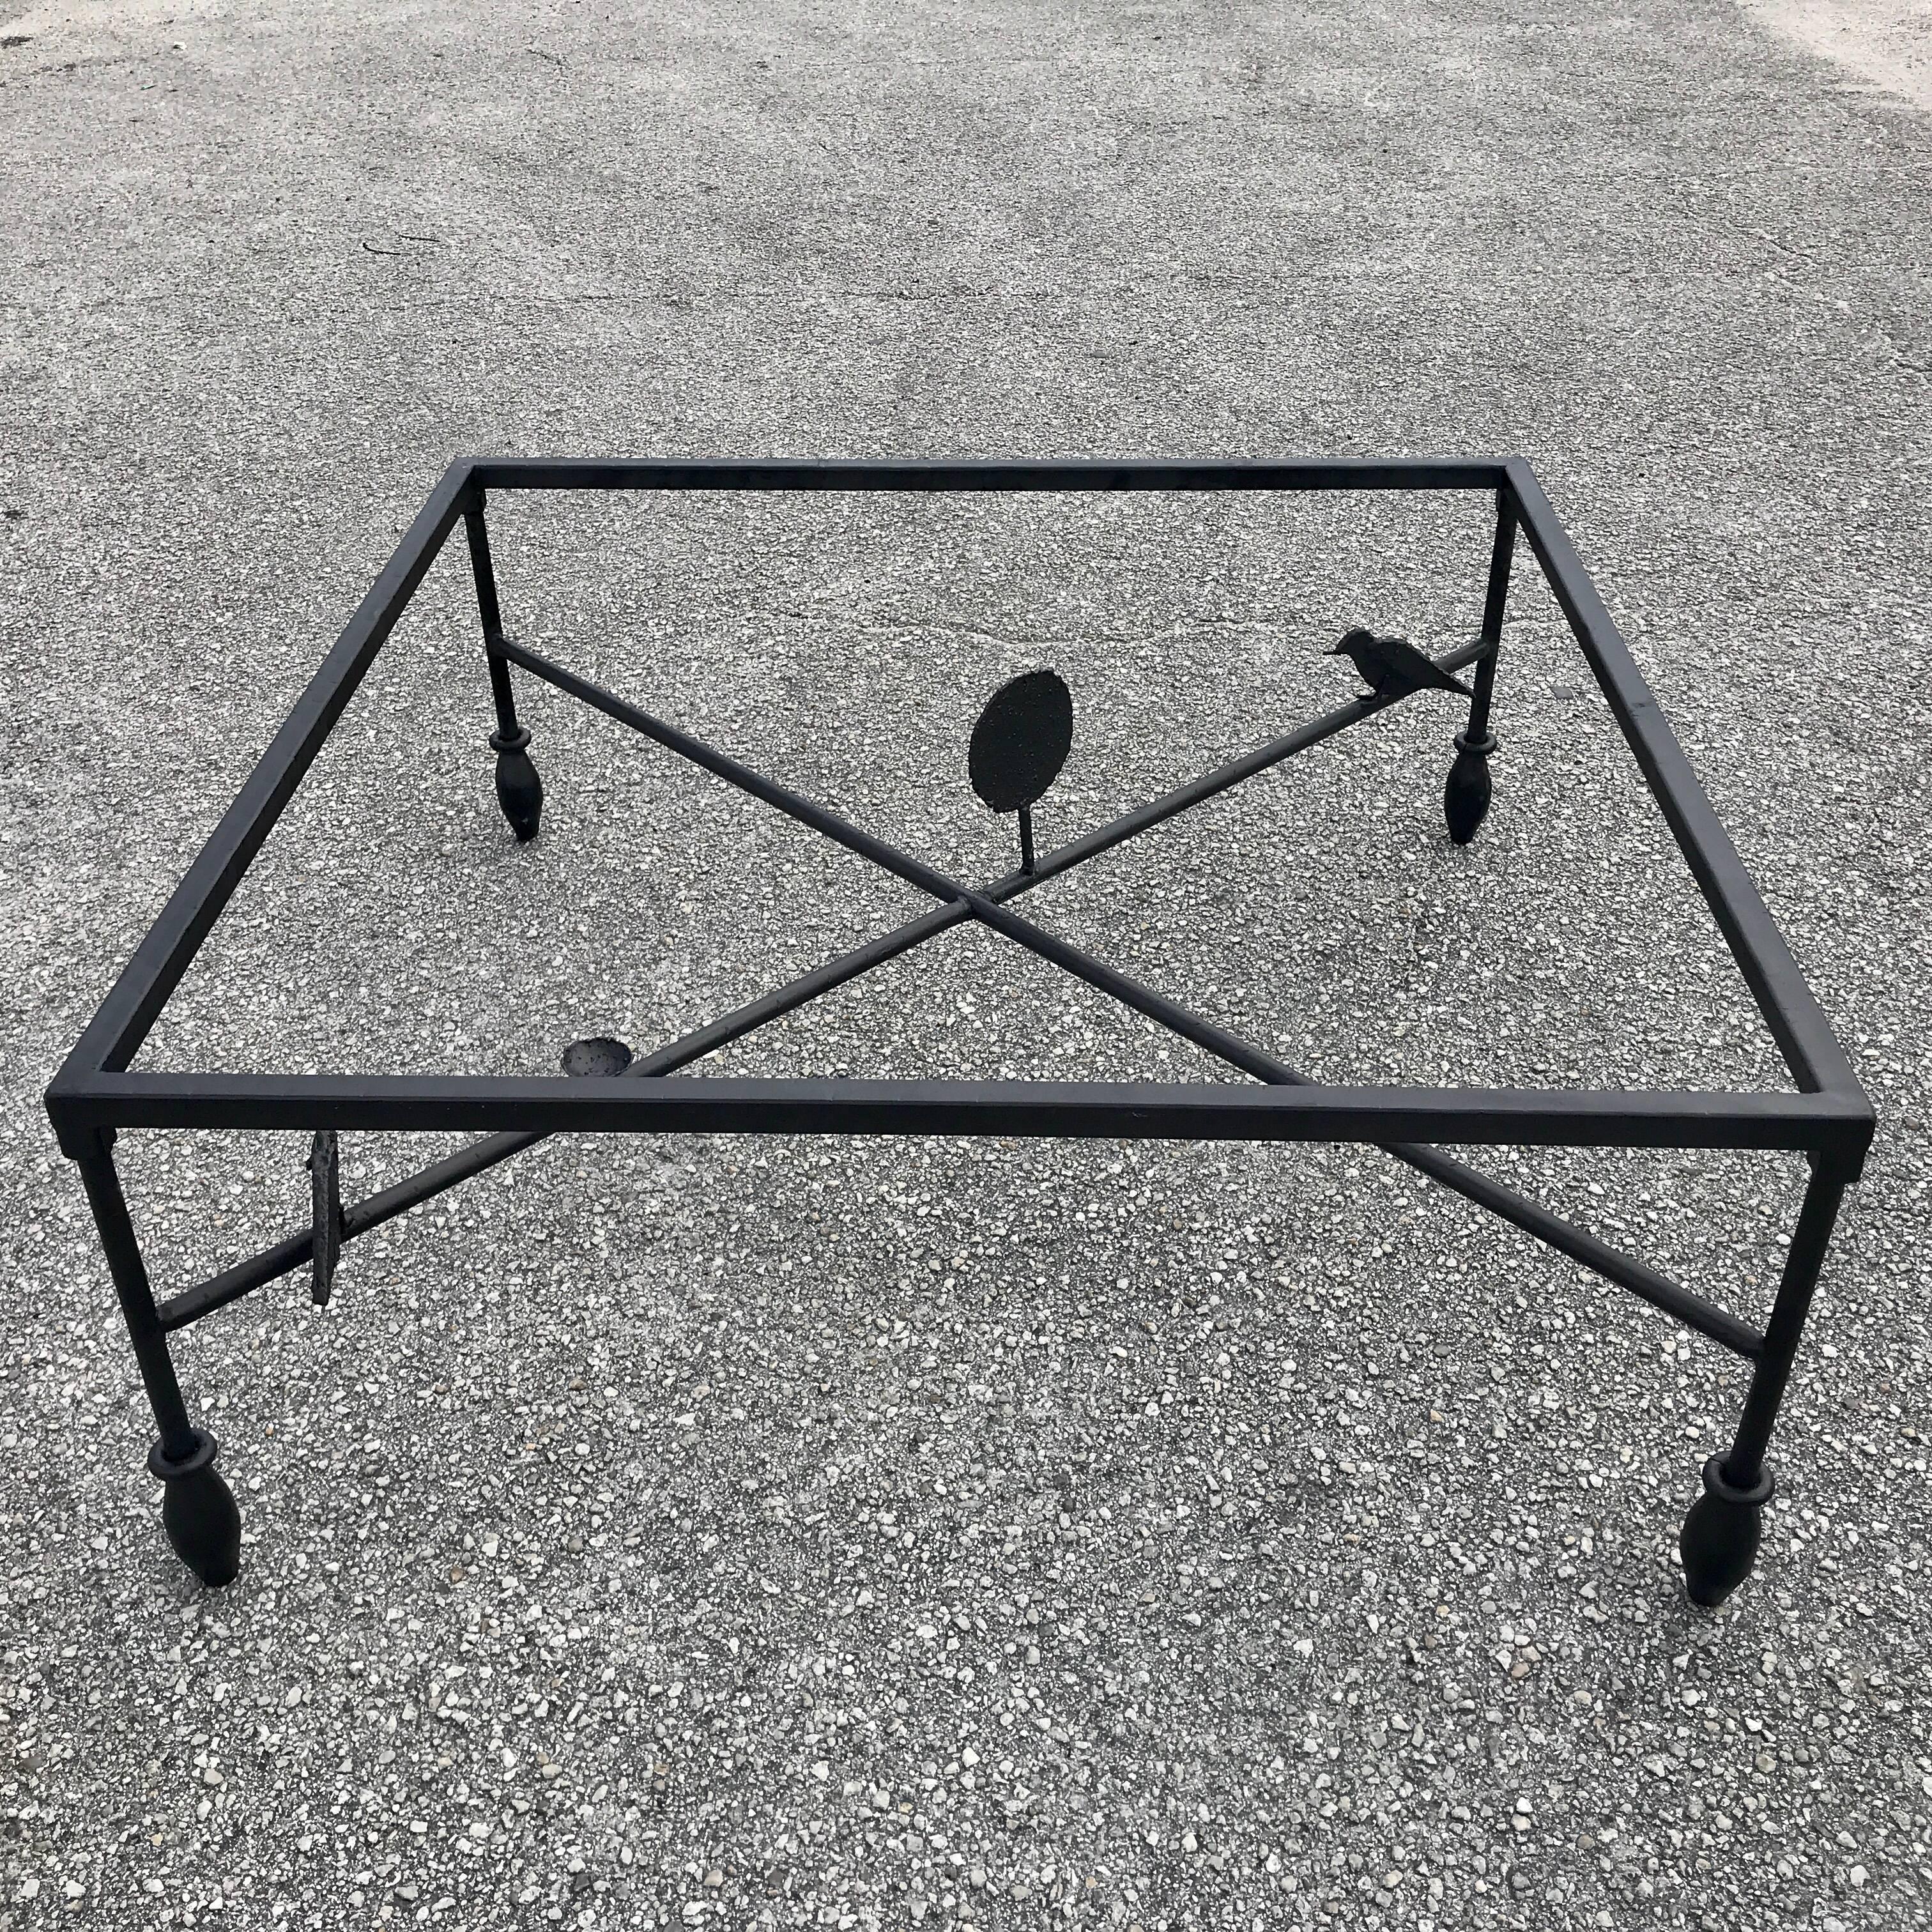 Giacometti style coffee table, oil rubbed bronze enameled wrought iron. Sold without glass. Please inquire with us for glass size suggestions or we can facilitate the acquisition of glass. Measures: 48